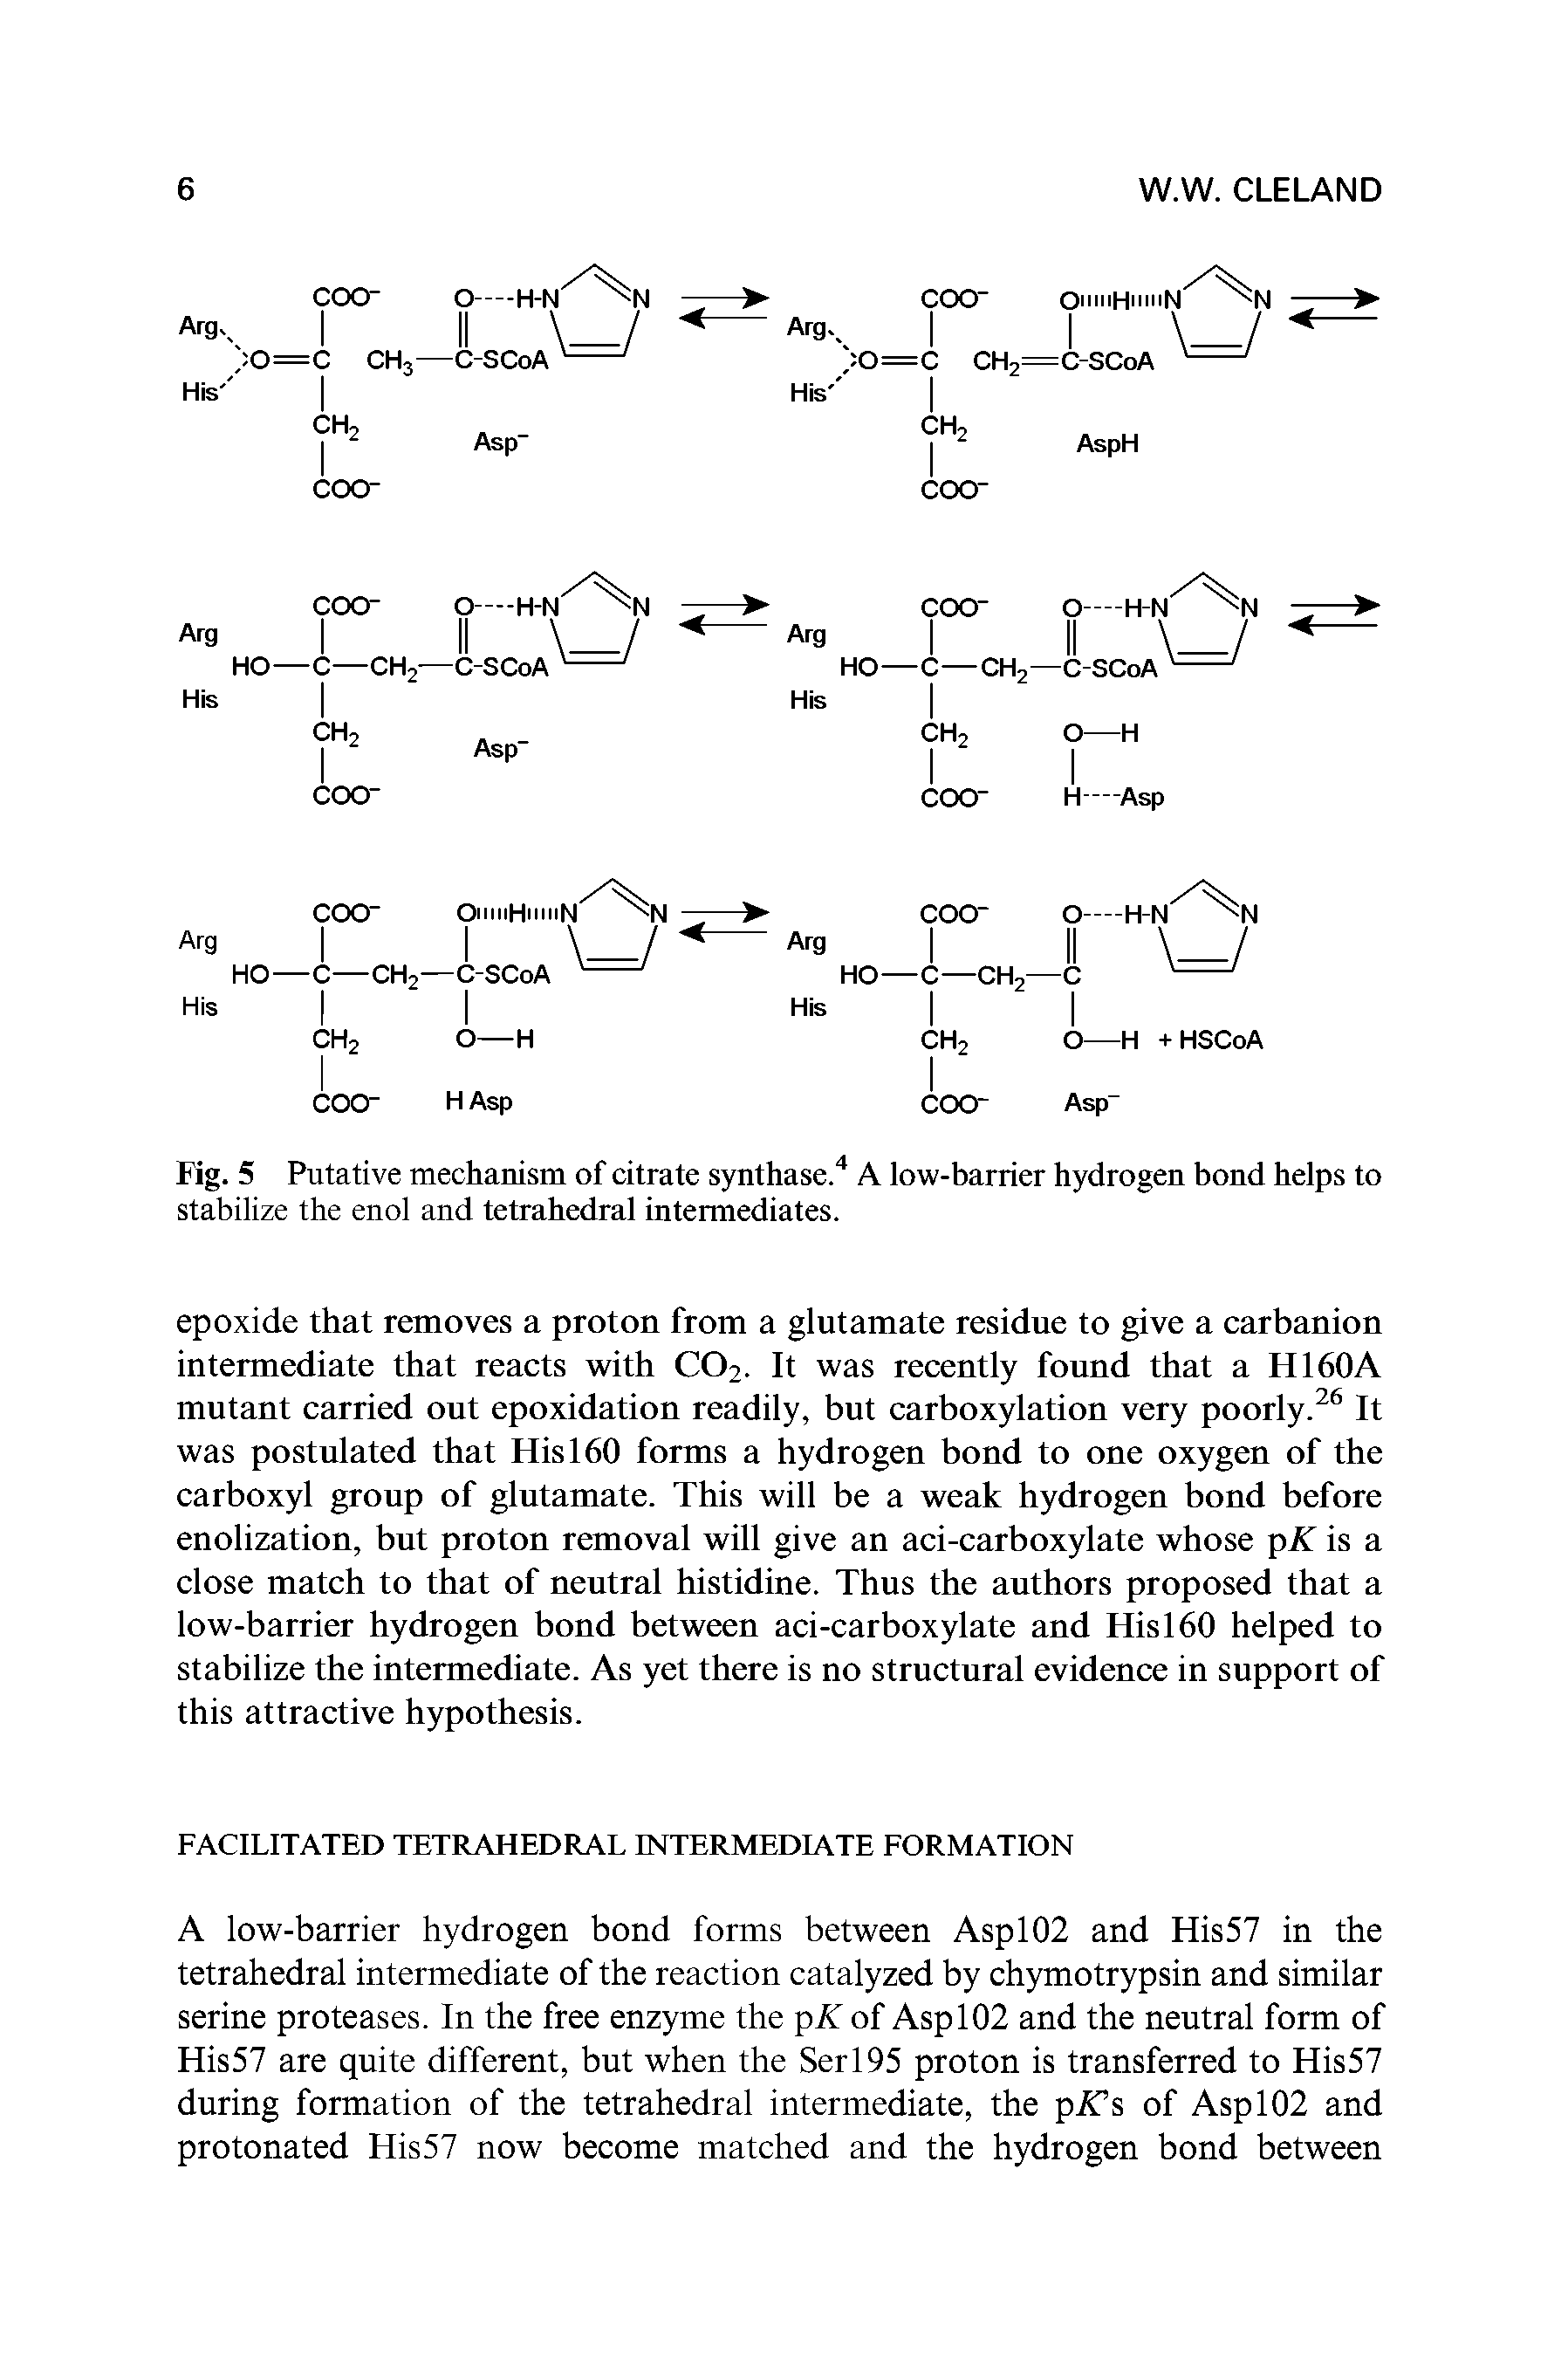 Fig. 5 Putative mechanism of citrate synthase.4 A low-barrier hydrogen bond helps to stabilize the enol and tetrahedral intermediates.